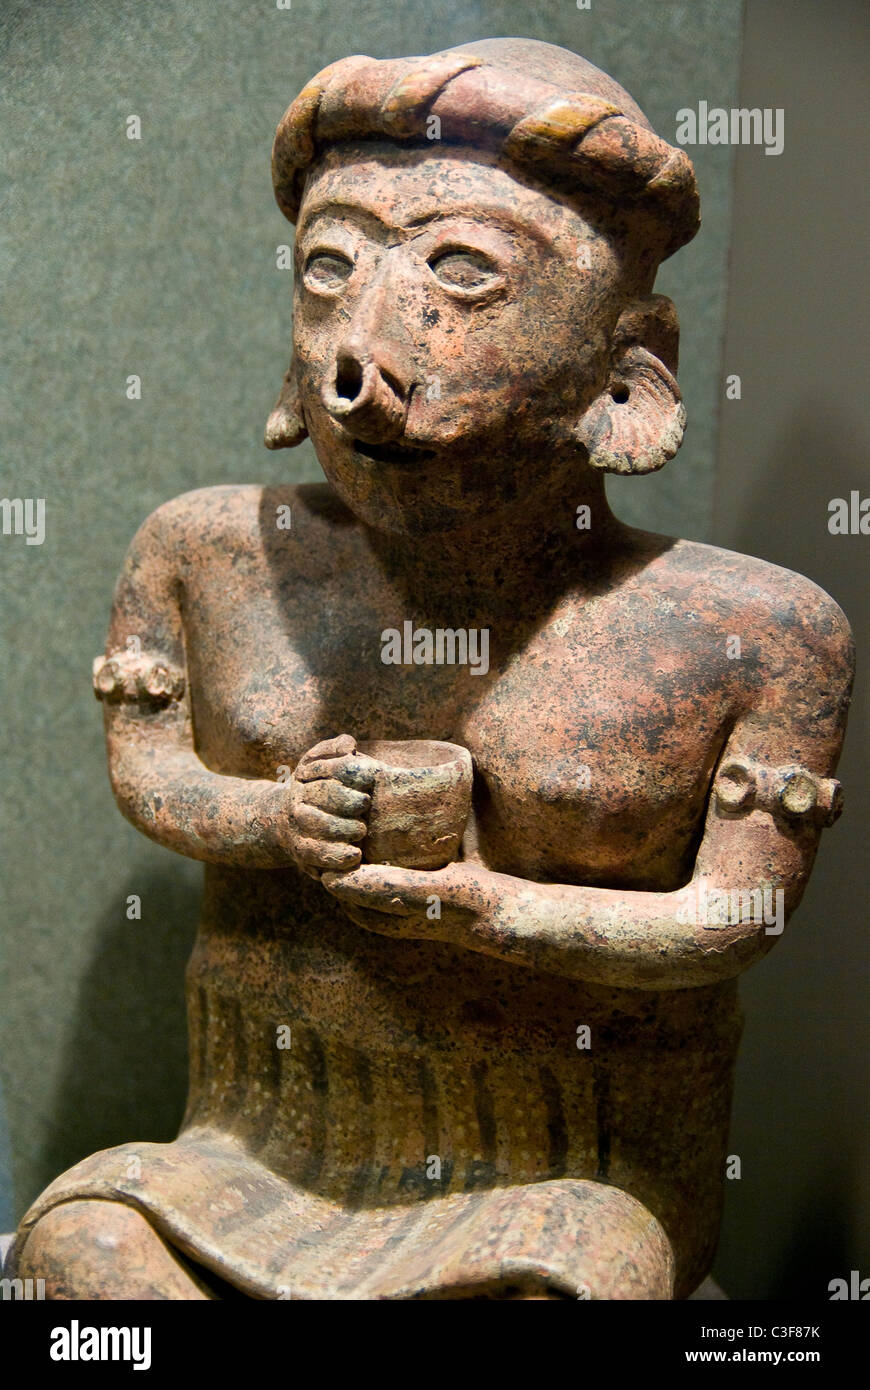 Mexico.Mexico city.National Museum of Anthropology.Jalisco culture.Ceramic figure . Stock Photo